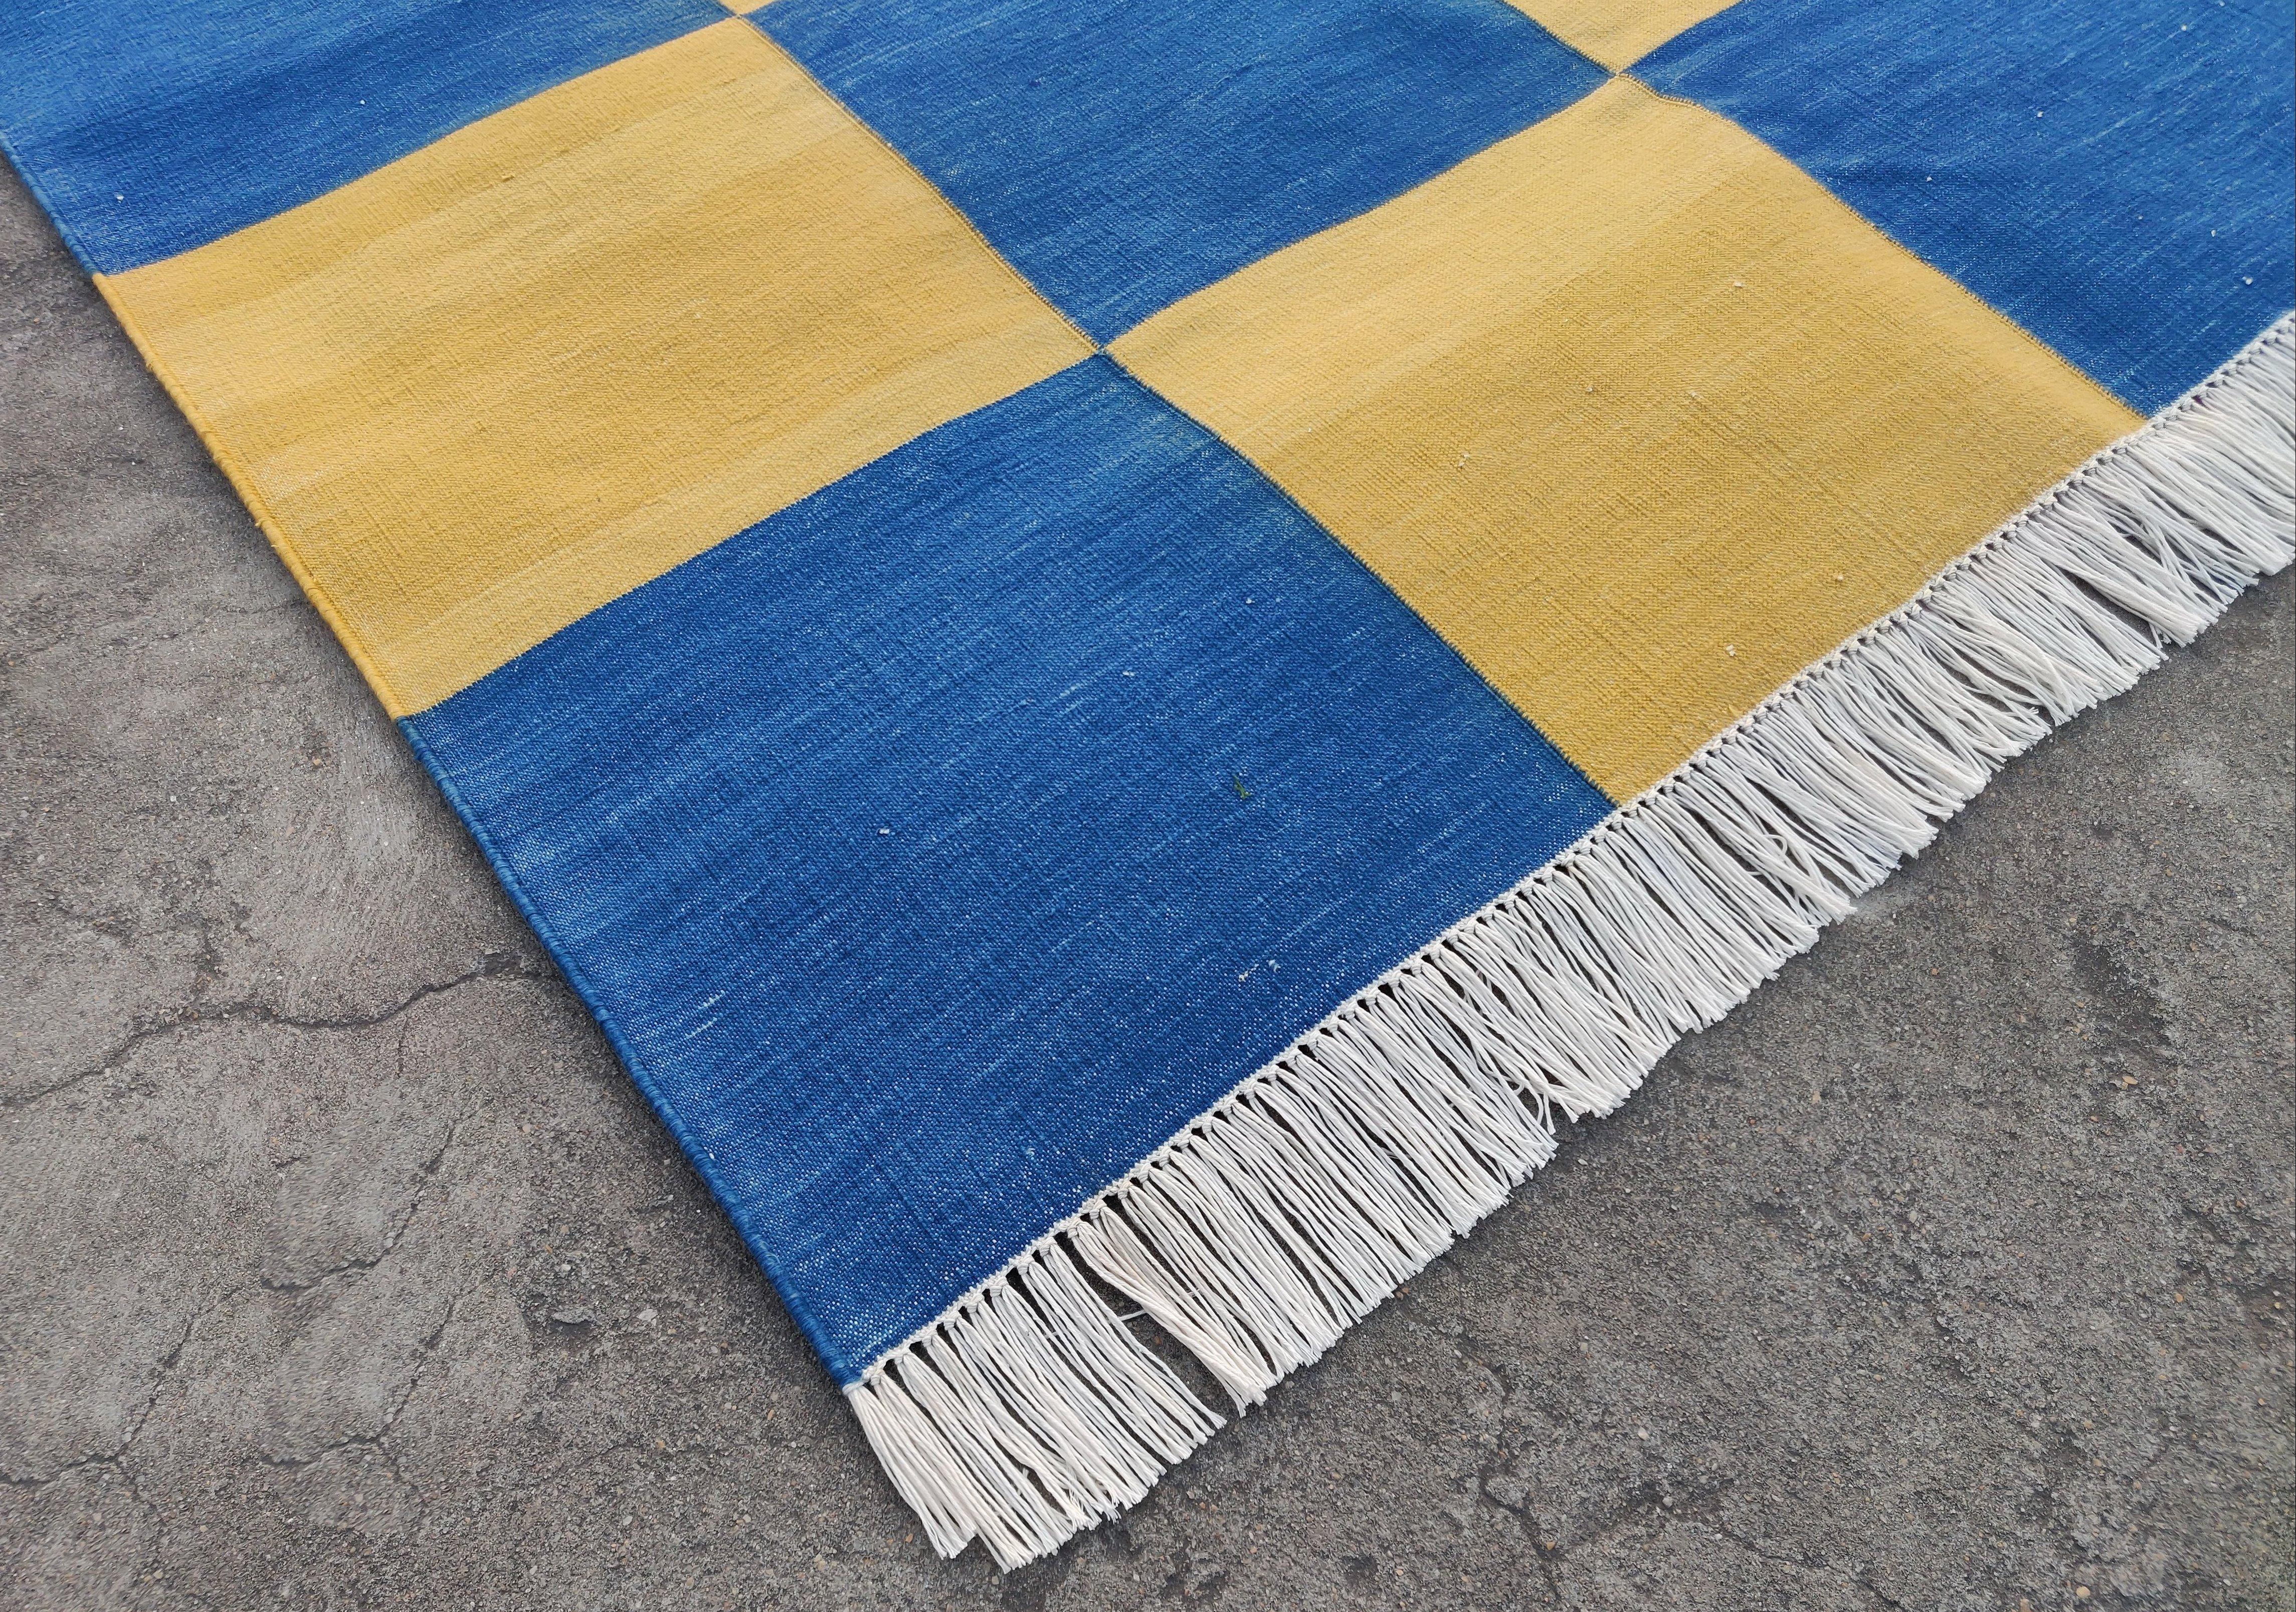 Hand-Woven Handmade Cotton Area Flat Weave Rug, 8x10 Blue And Yellow Checked Indian Dhurrie For Sale